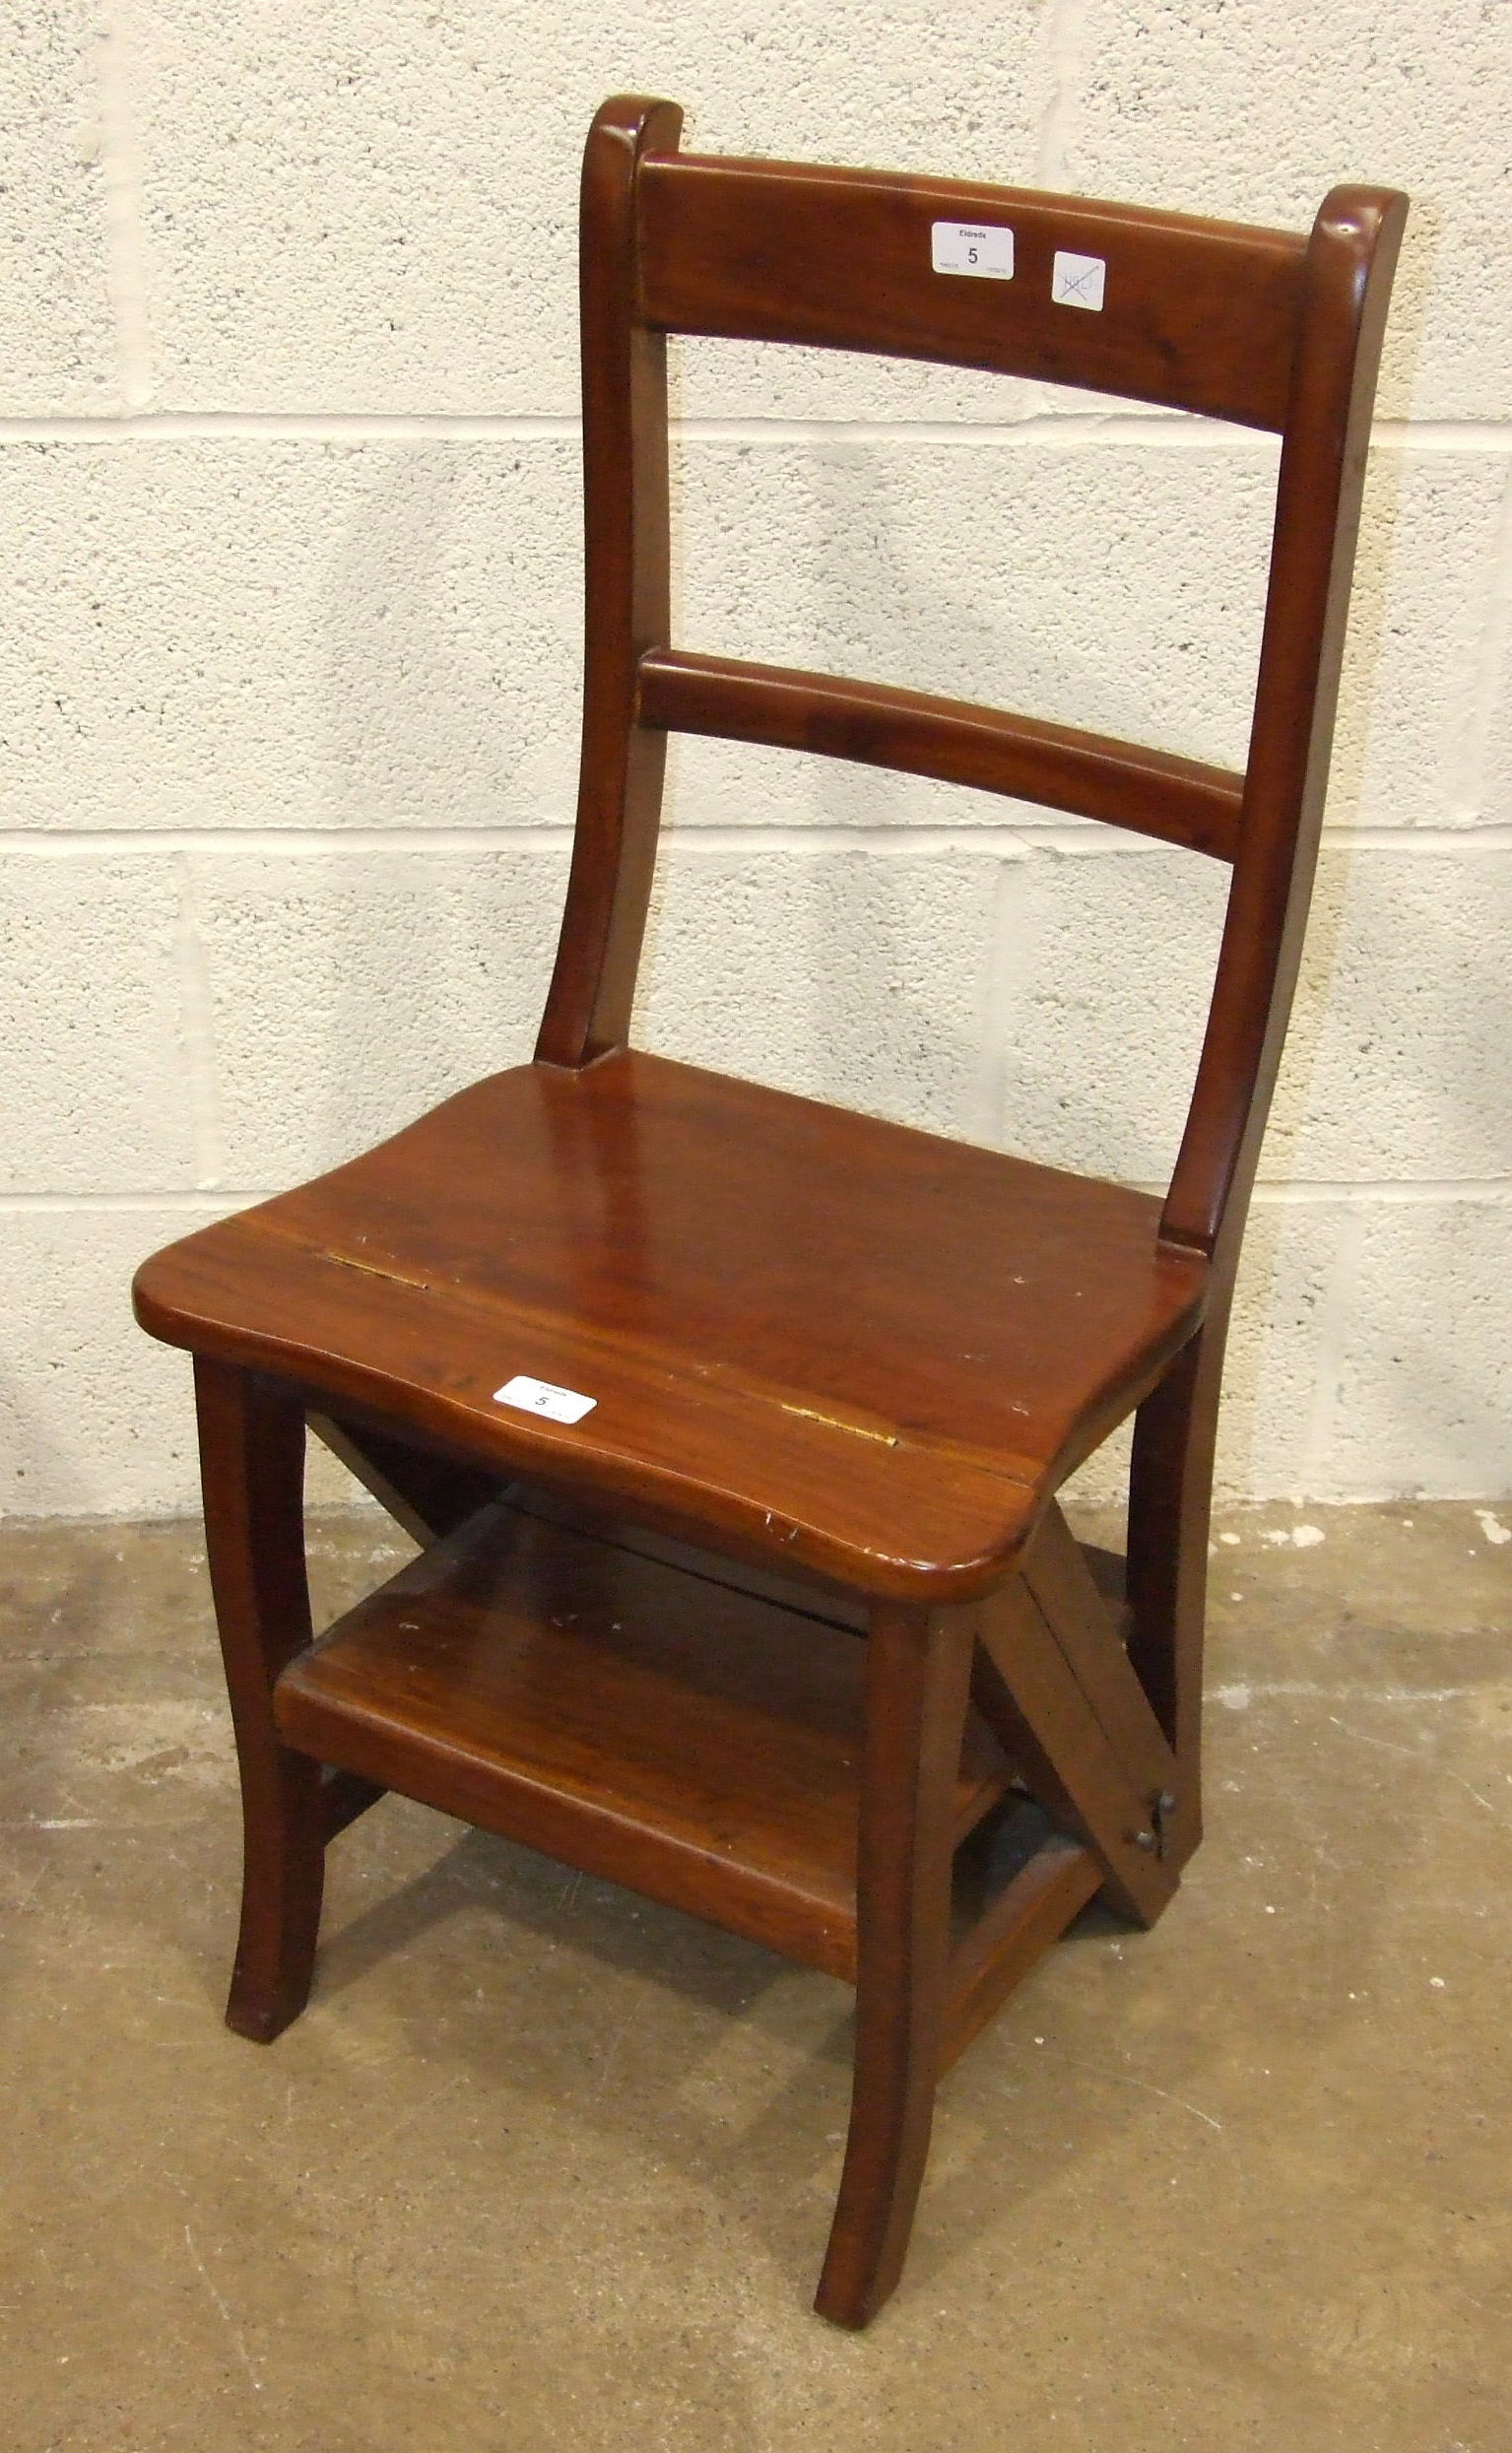 A reproduction hardwood metamorphic library chair.